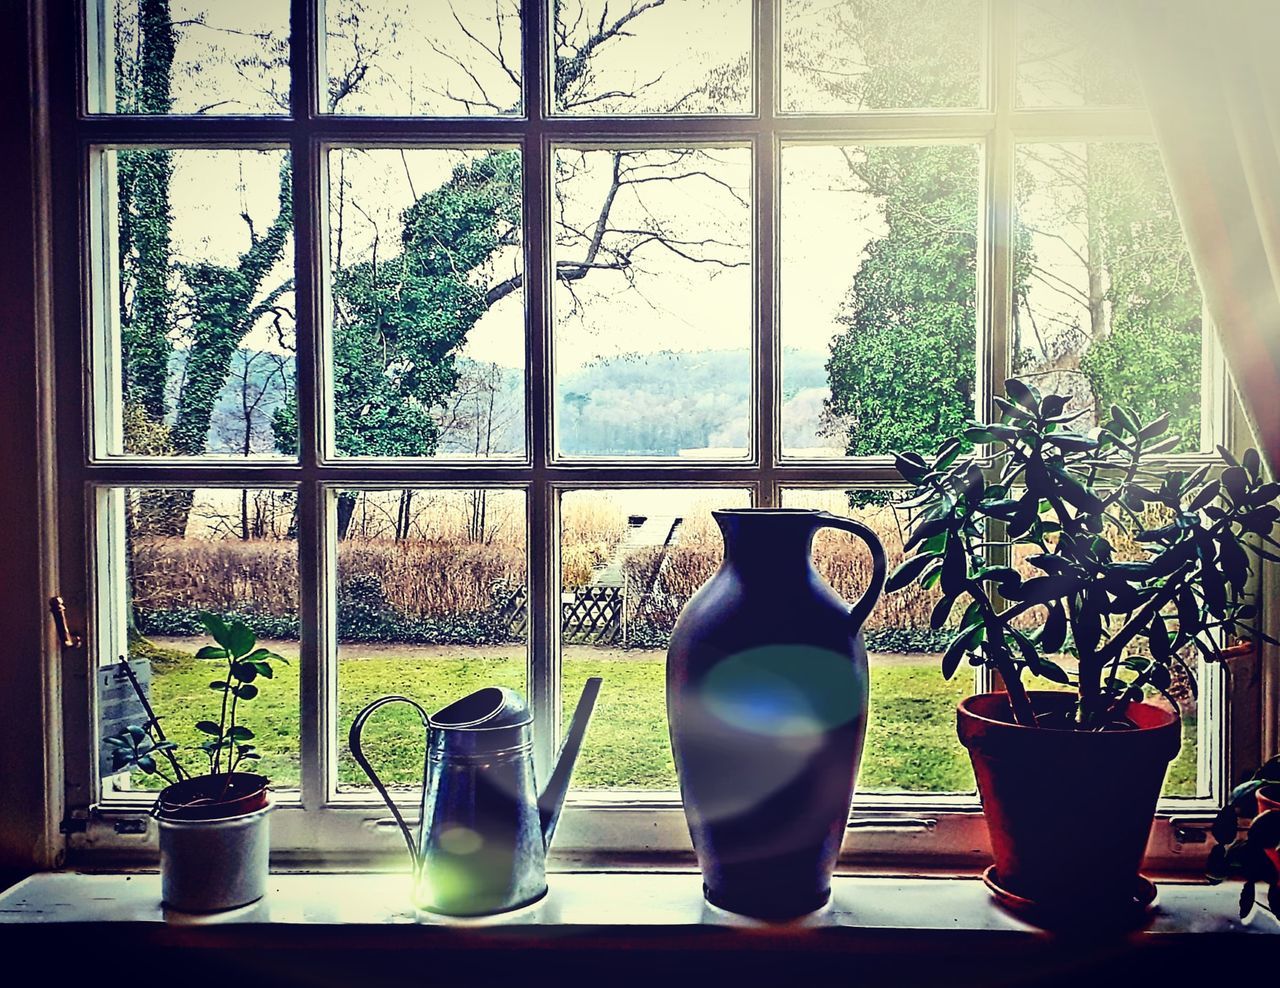 window, plant, transparent, potted plant, growth, glass - material, indoors, nature, day, table, no people, tree, container, window sill, still life, drink, sunlight, bottle, food and drink, glass, flower pot, houseplant